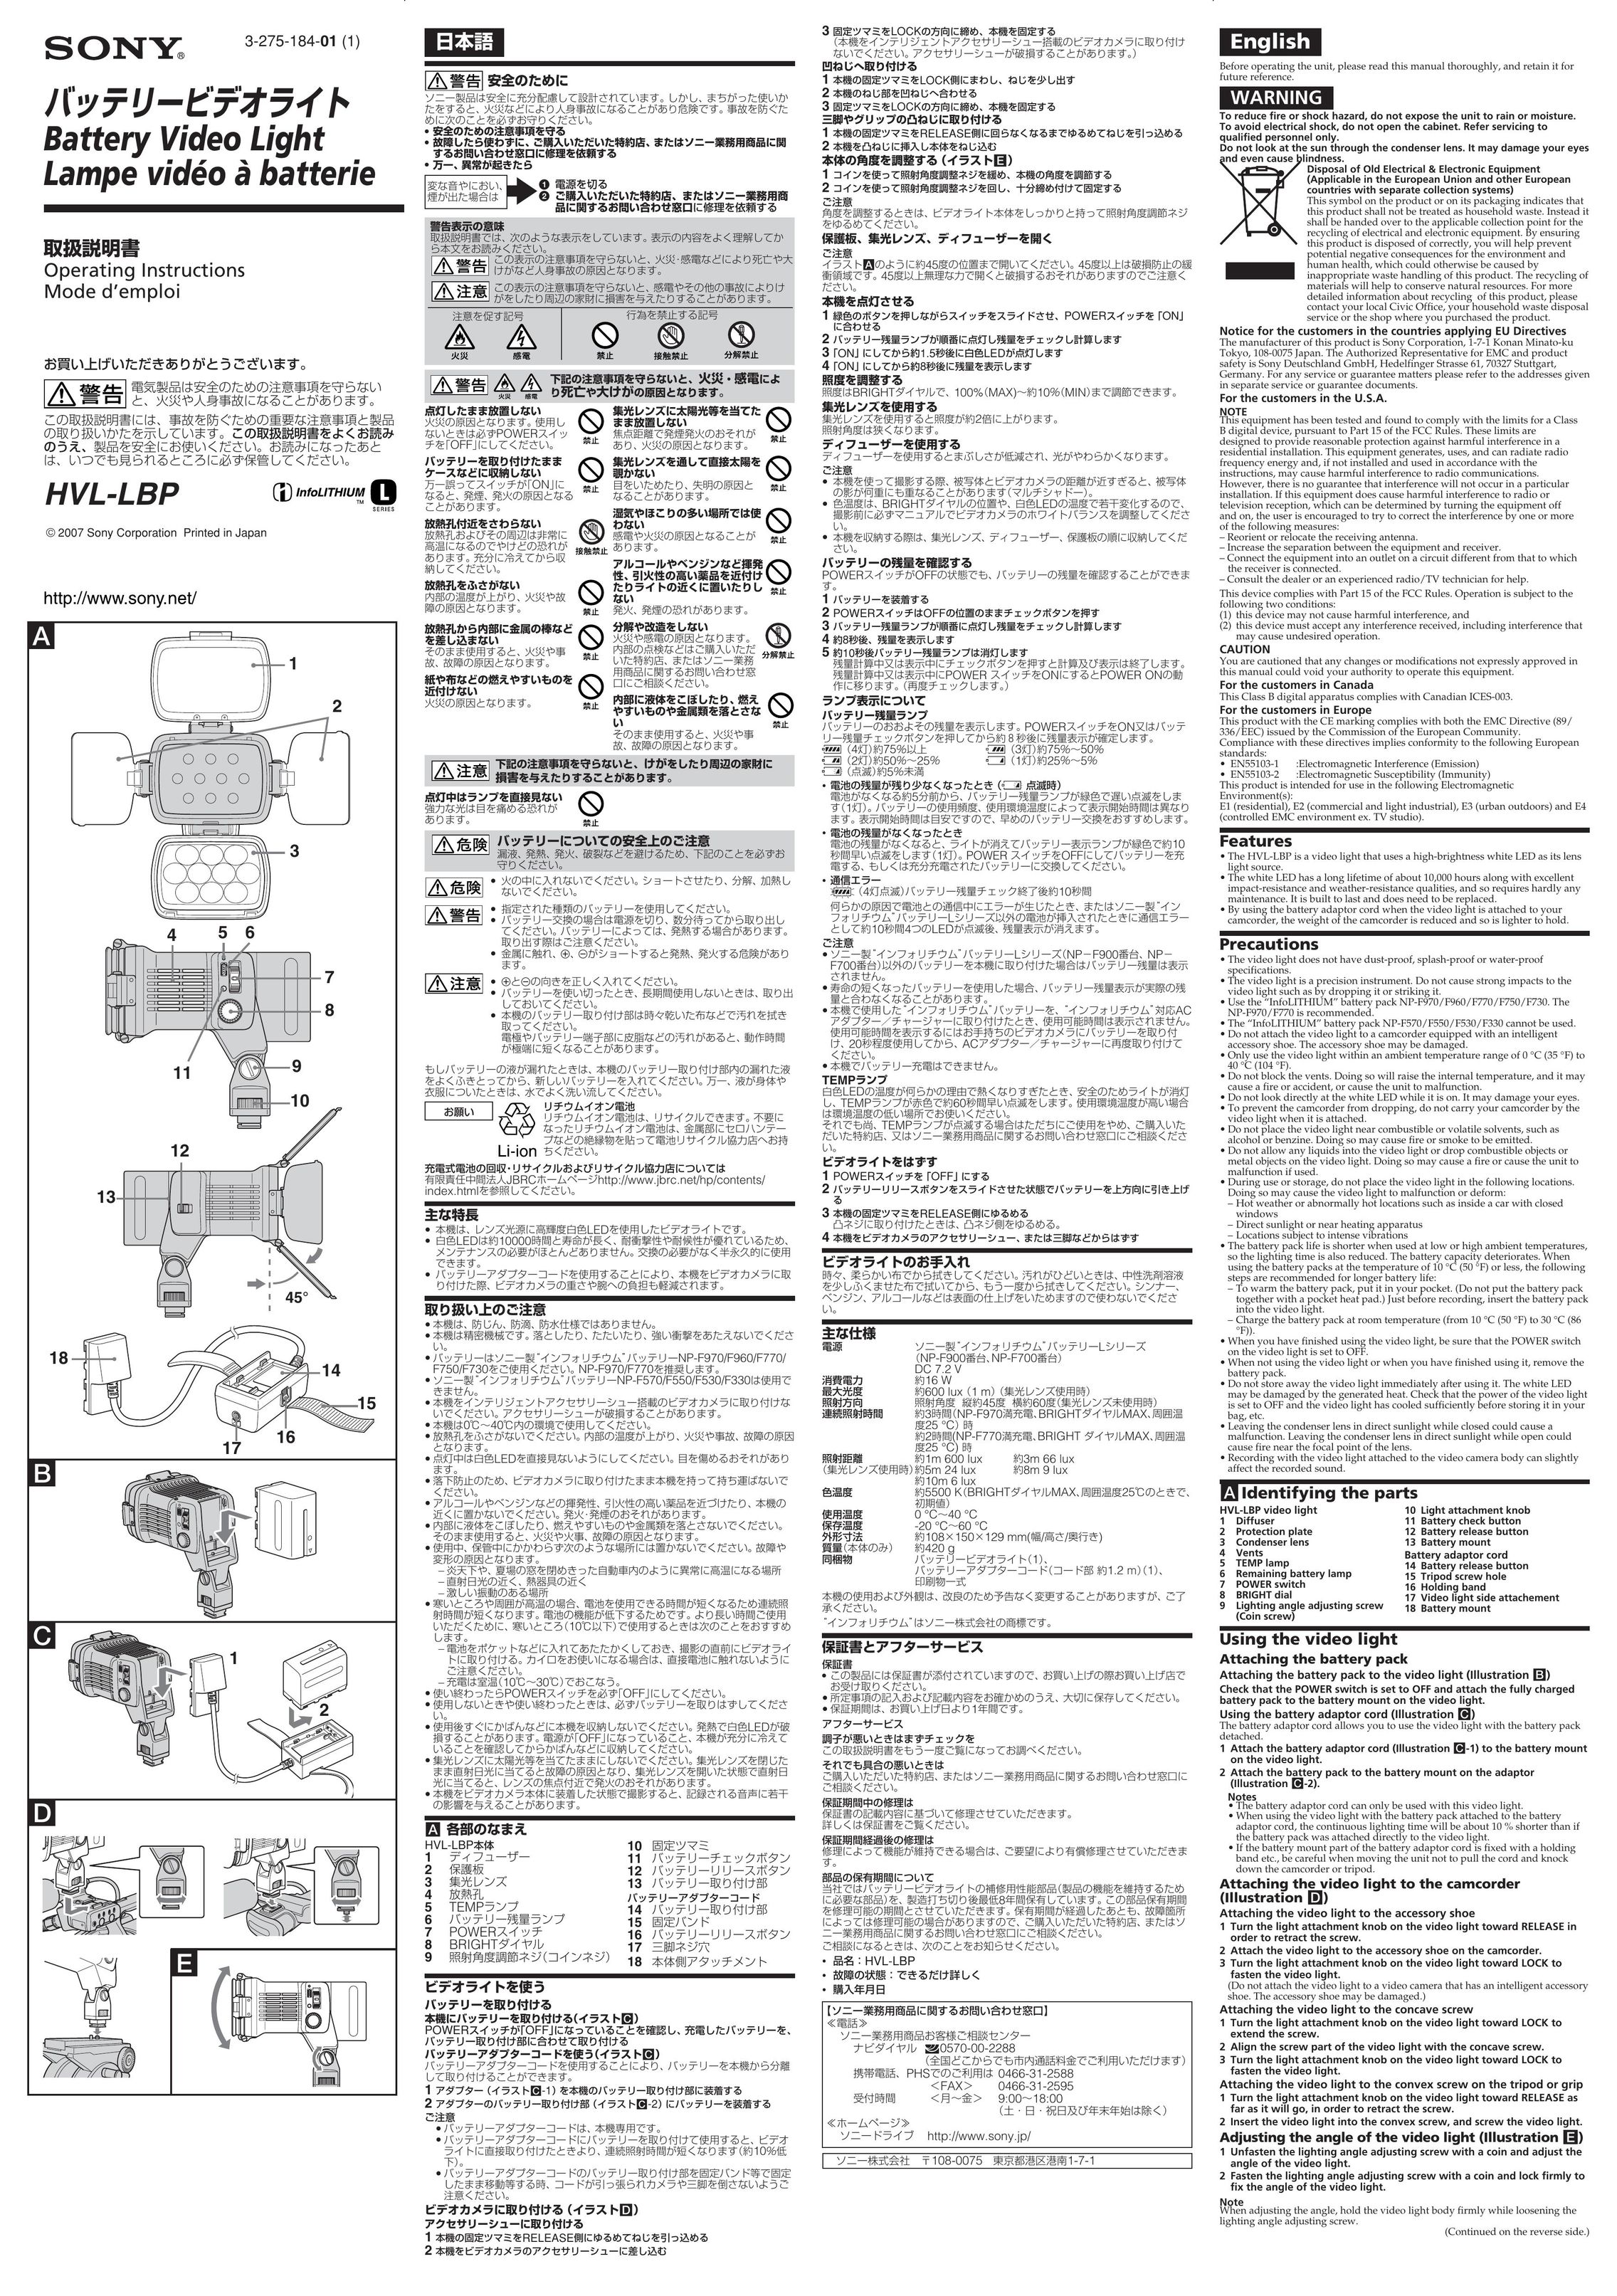 Sony HVL-LBP Indoor Furnishings User Manual (Page 1)